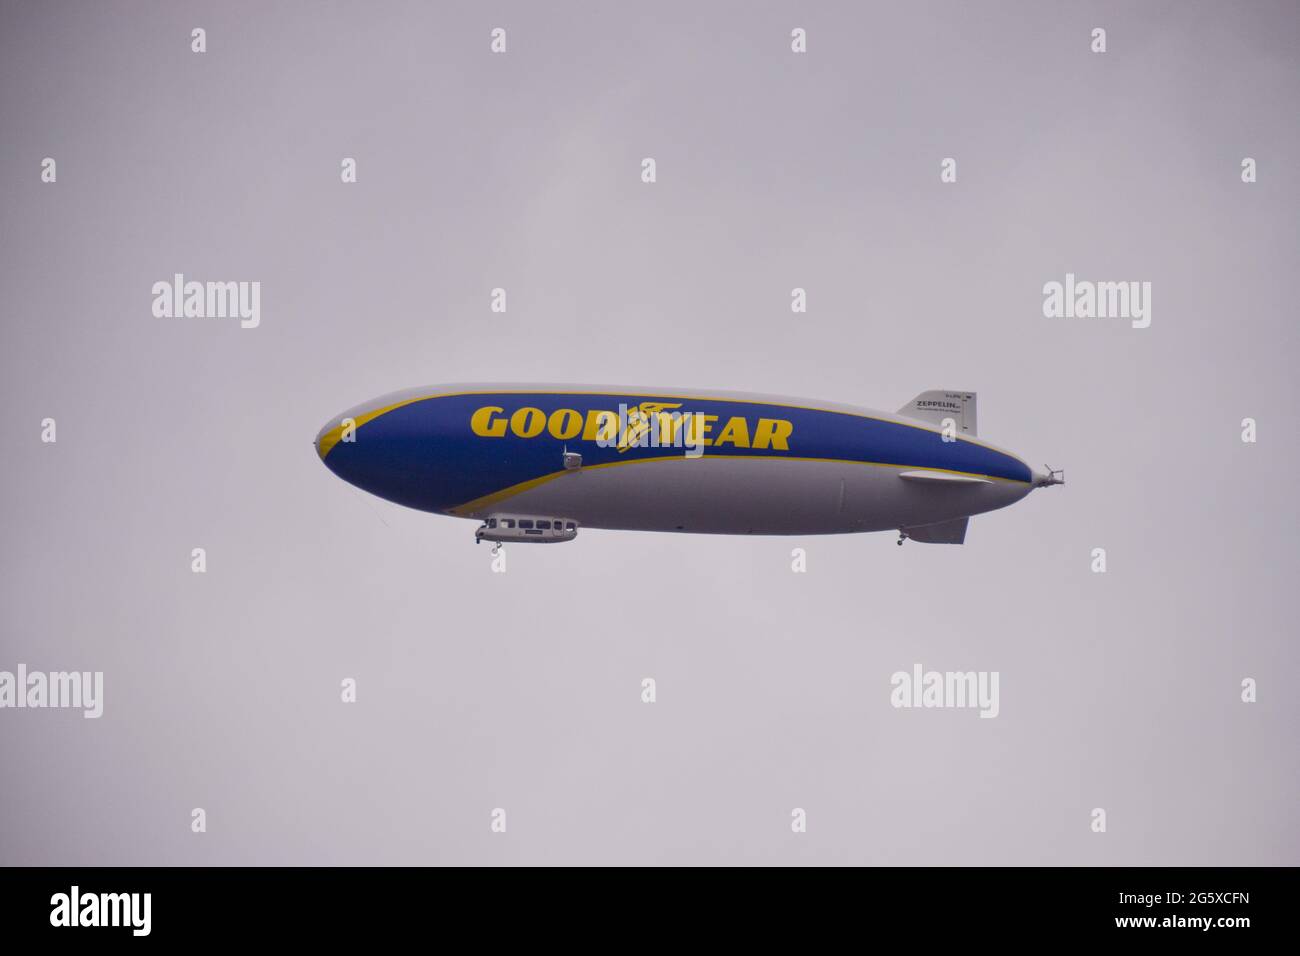 Pictures: Goodyear's new state-of-the-art airship arrives for